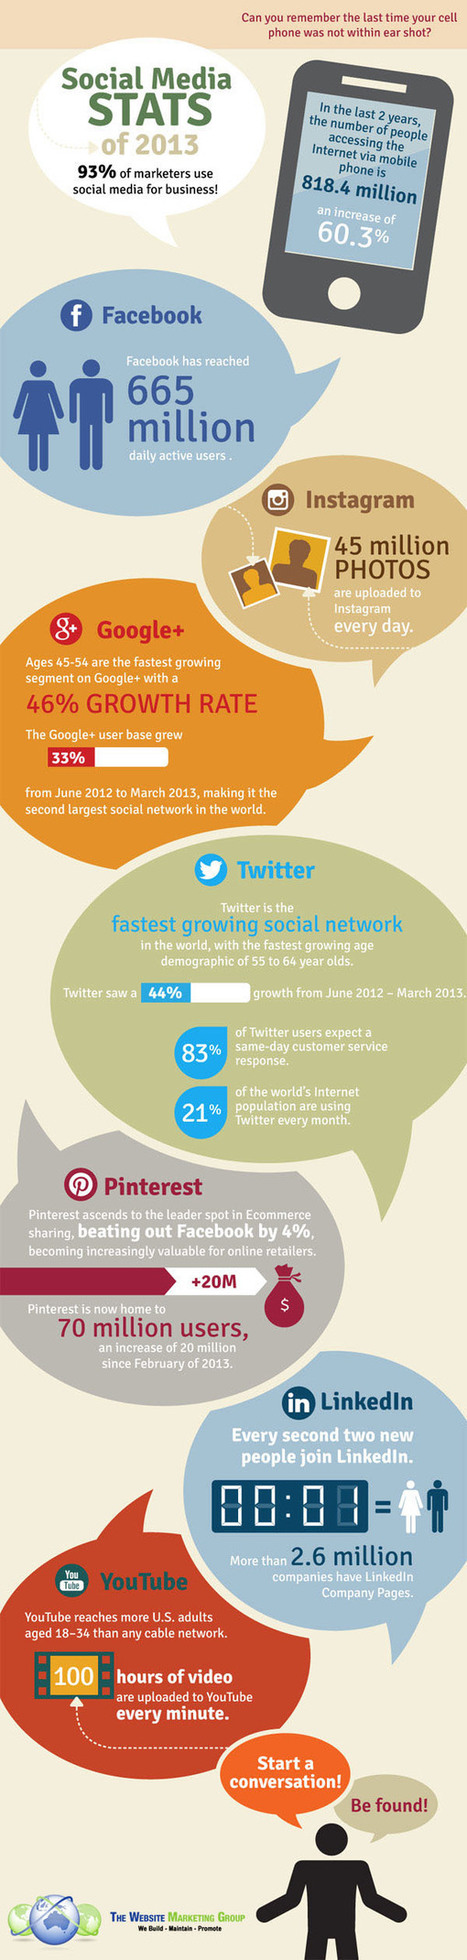 Social Media Infographic 2013 : Which platform is growing the fastest? | Design, Science and Technology | Scoop.it